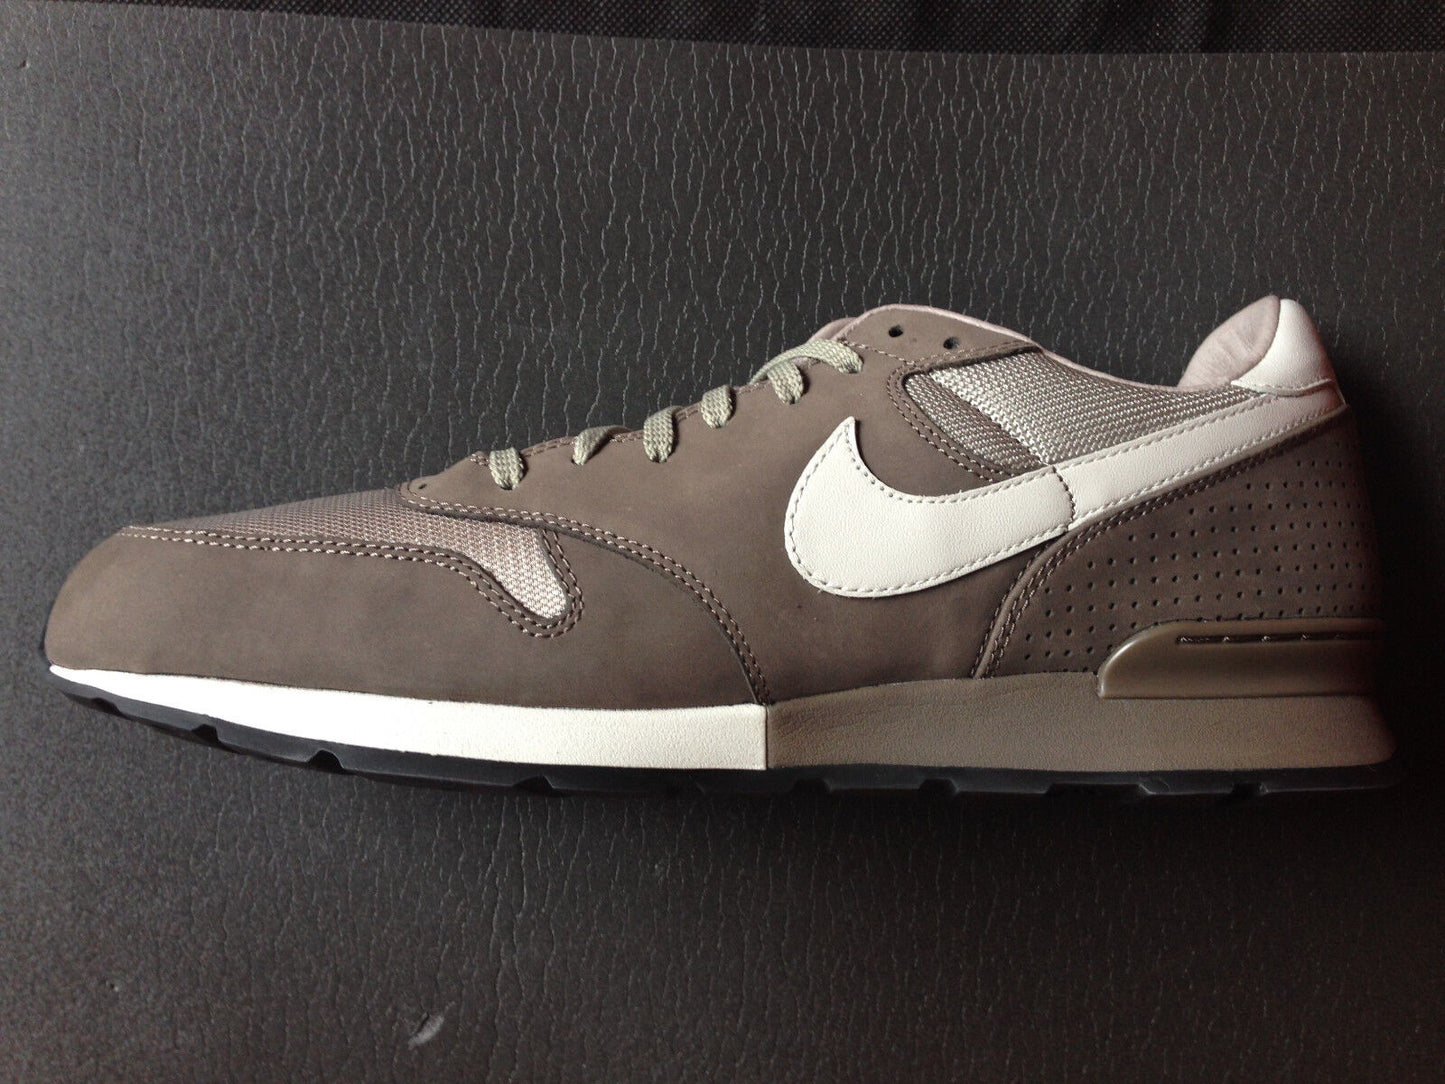 Nike Air Epic vintage colourway Luxe Zoom new in box US 12 UK 11 EUR 46